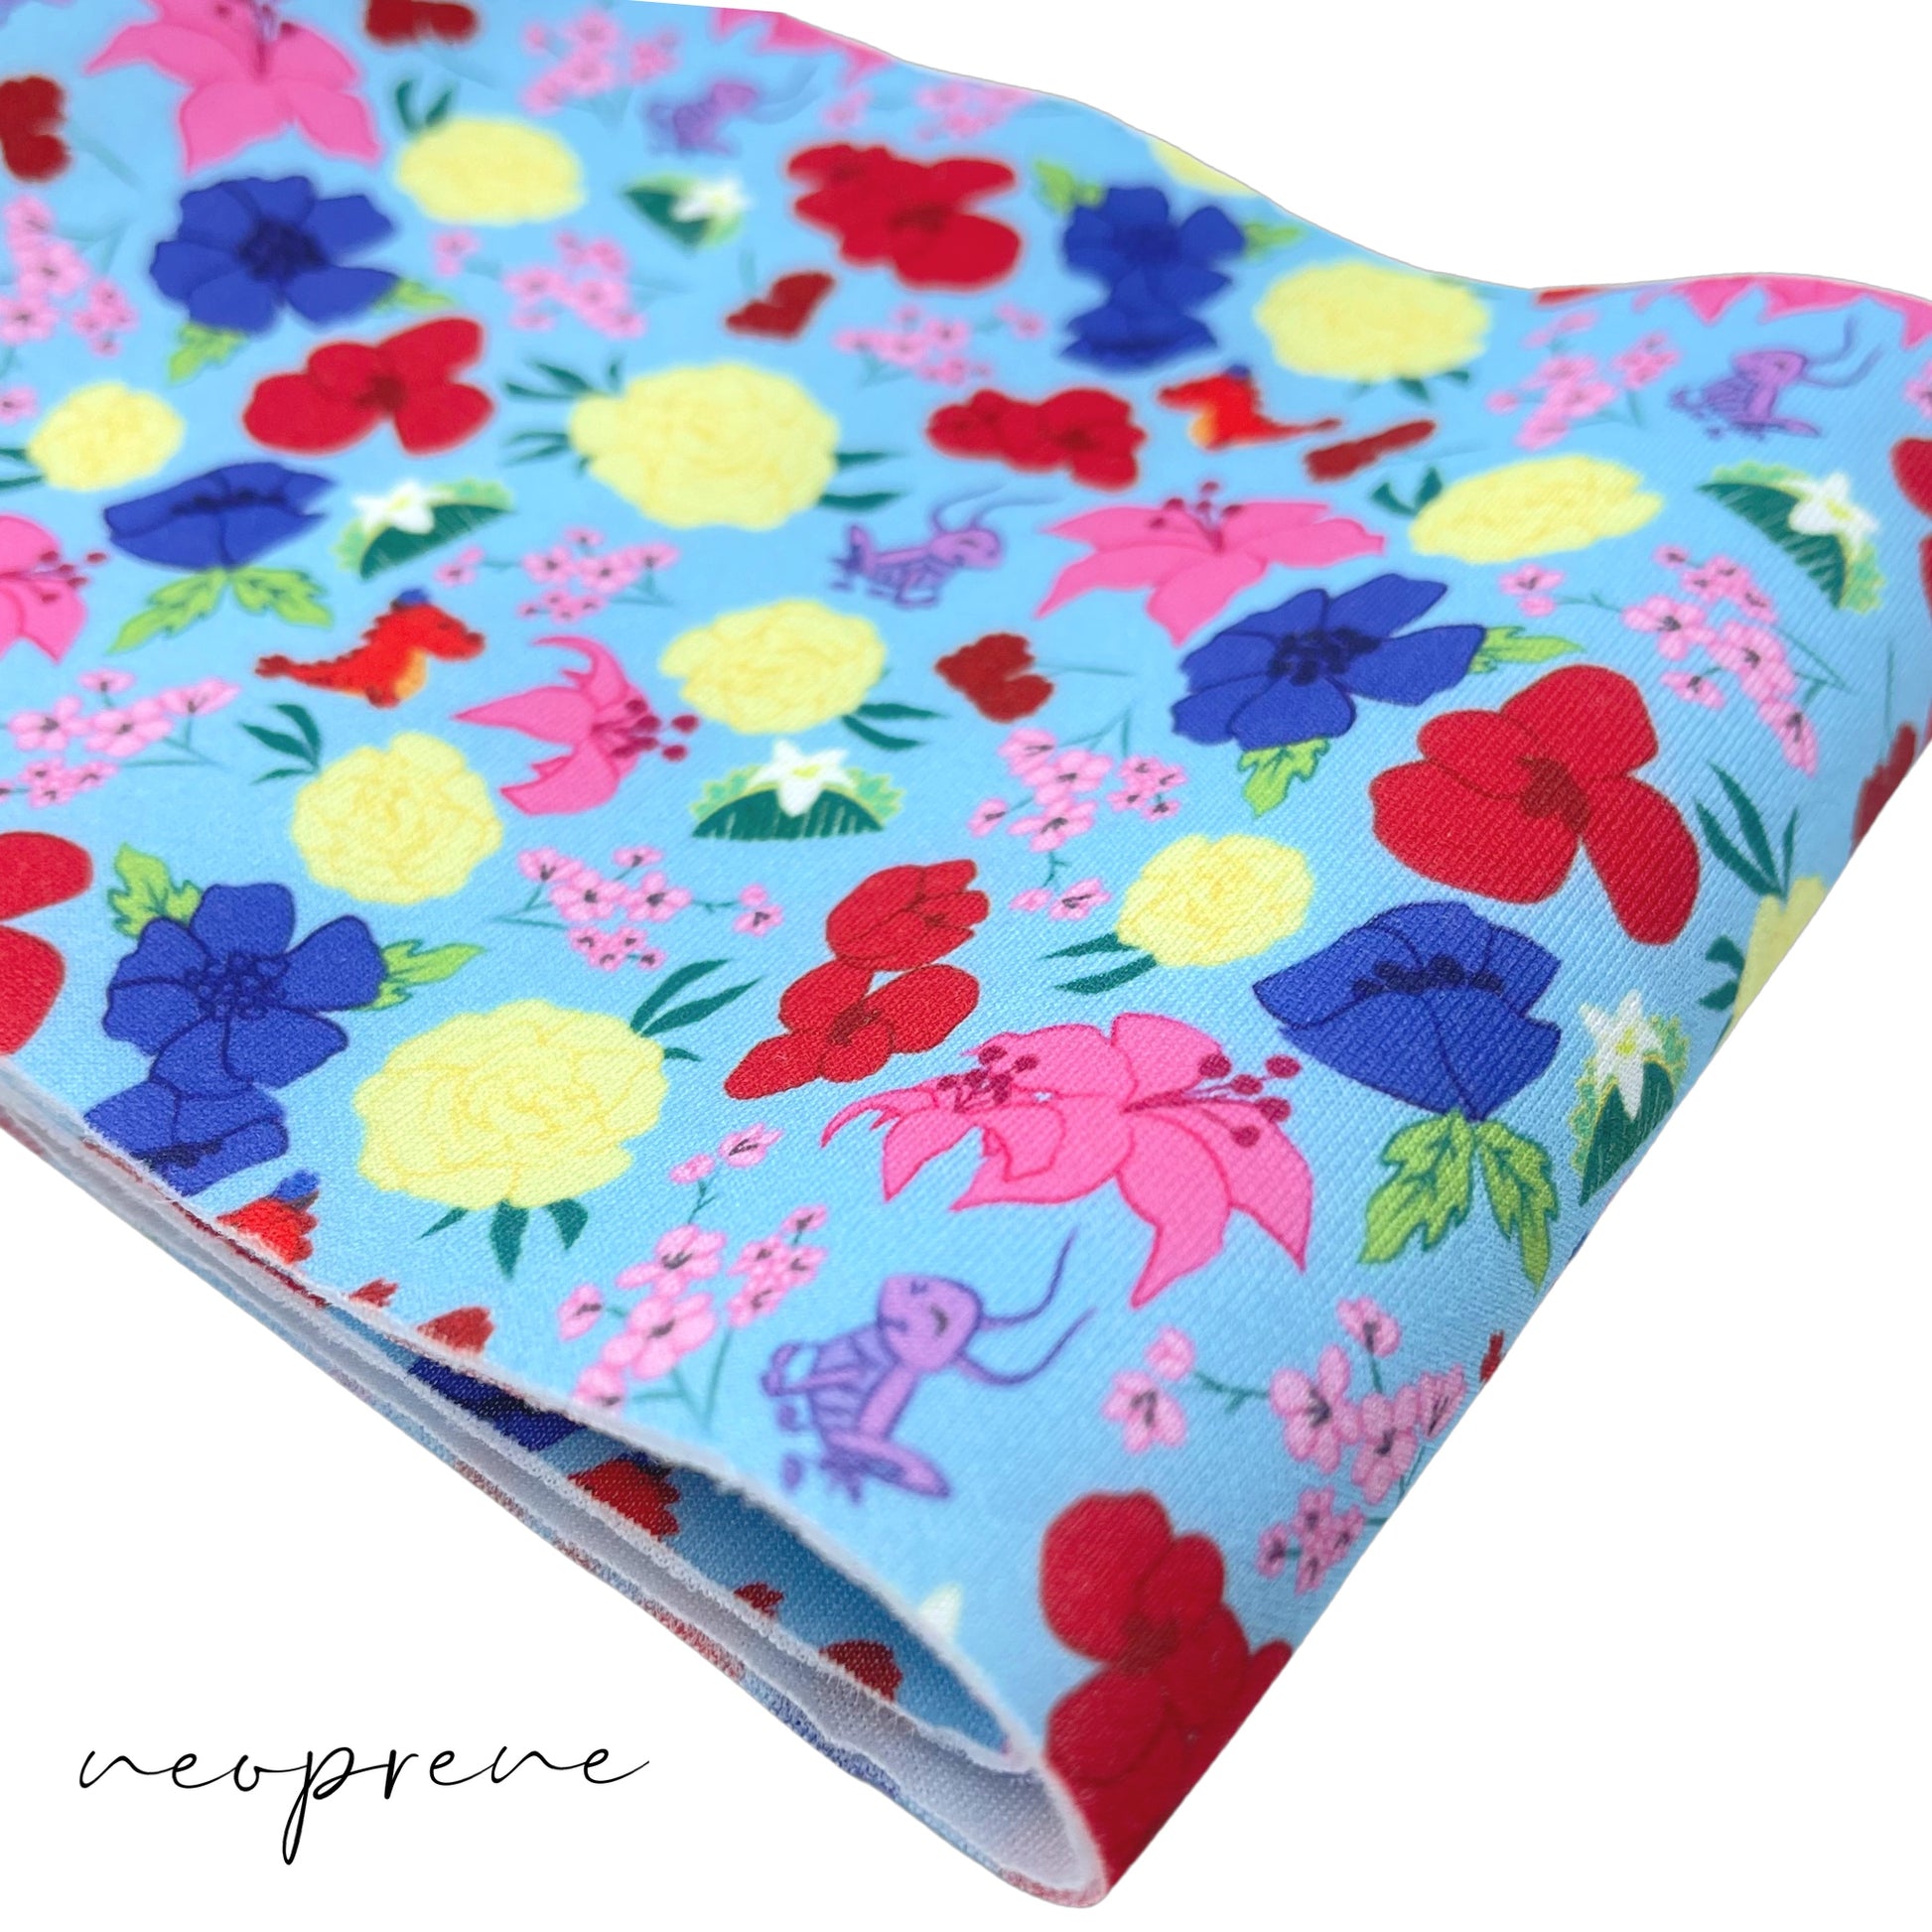 Folded light blue neoprene fabric with yellow, pink, royal blue, and red floral princess pattern including crickets, hair clips, and a red dragon.